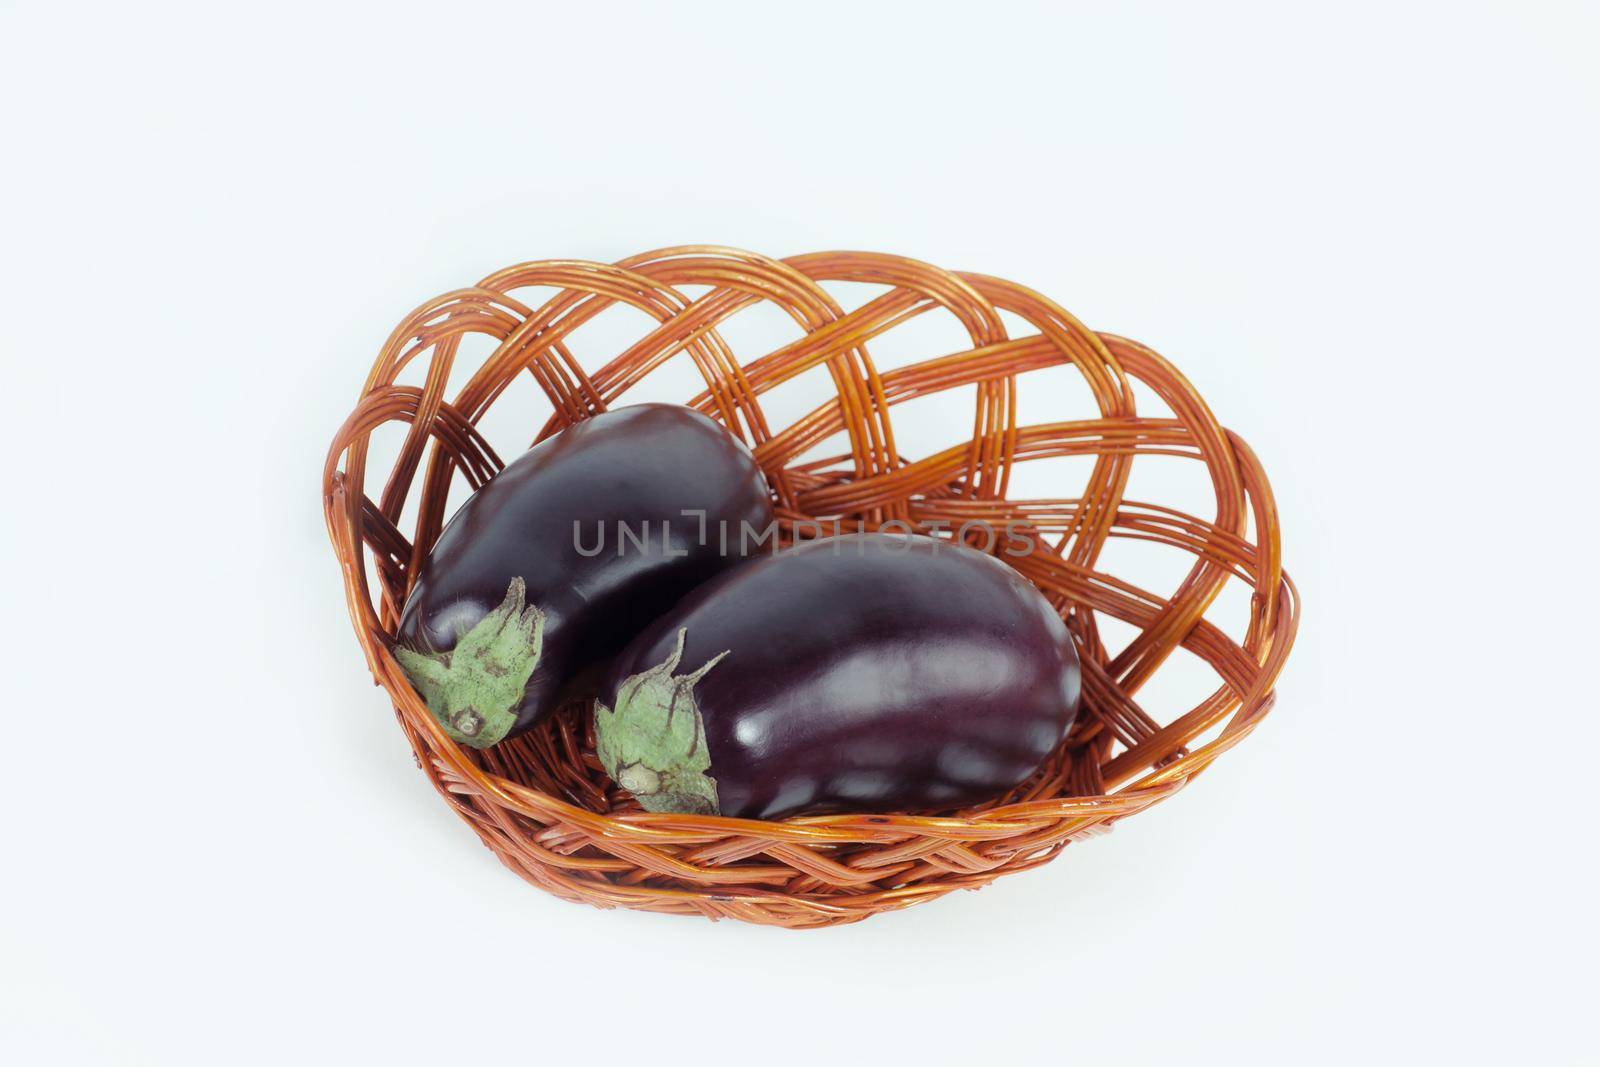 two ripe eggplant in a wicker basket.isolated on white.photo with copy space